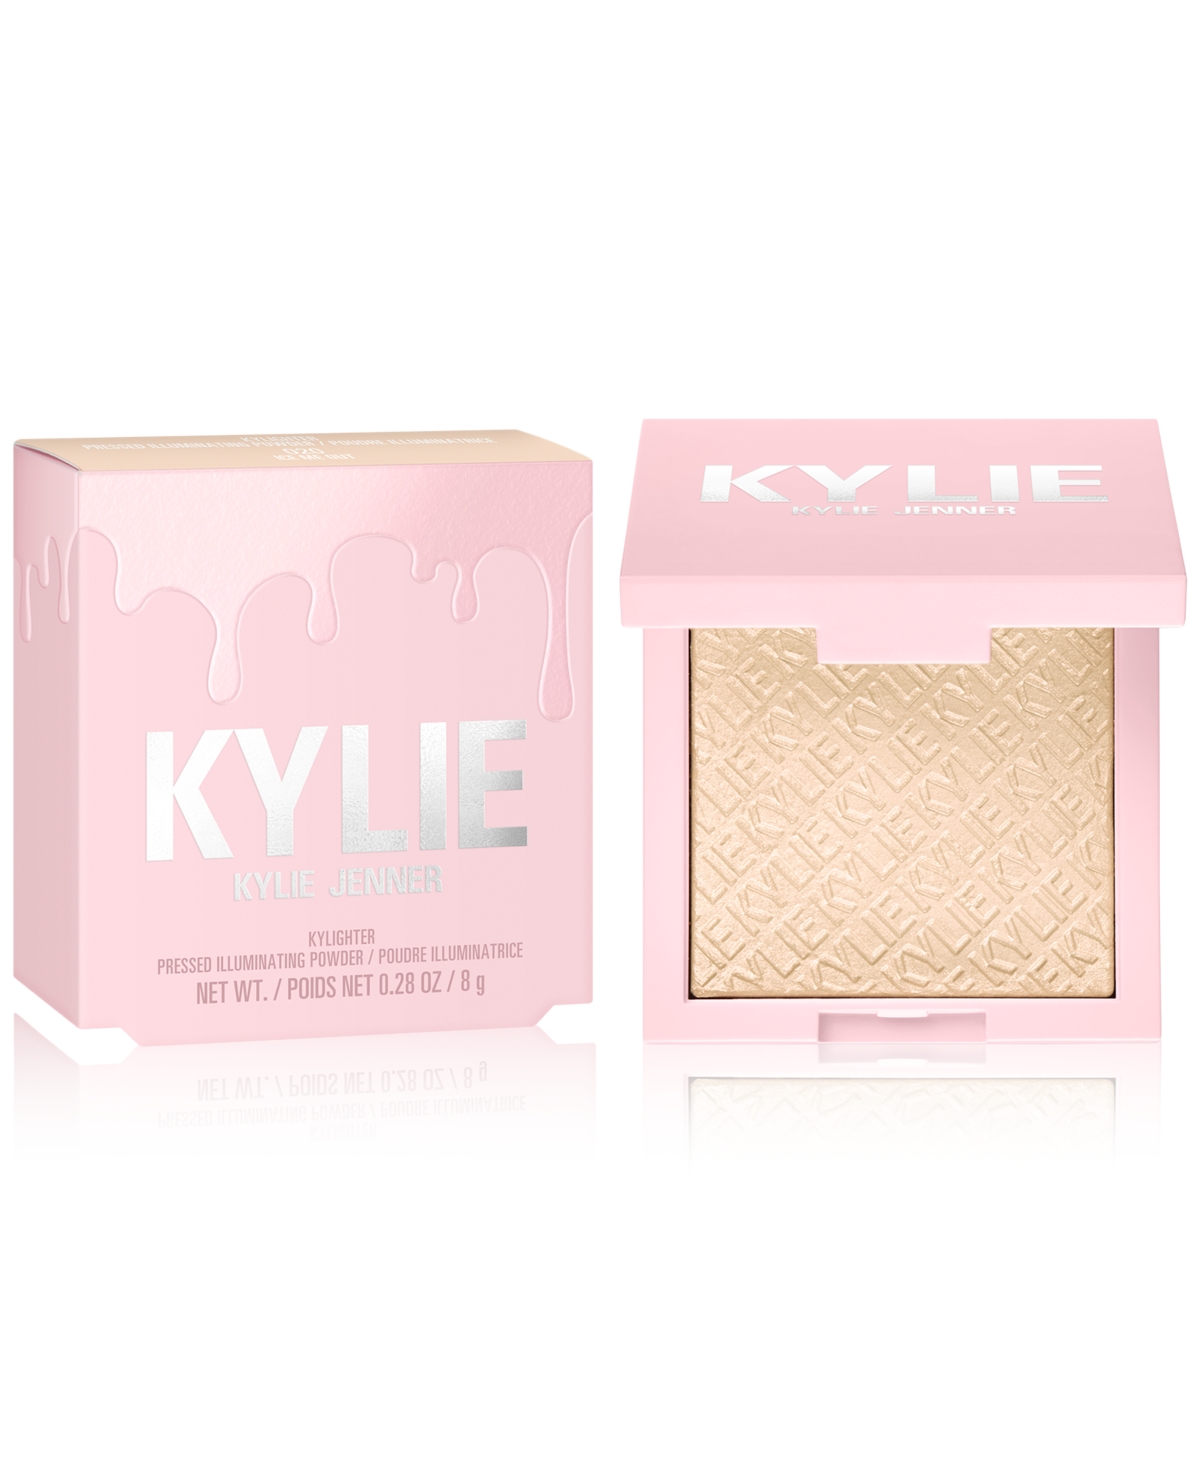 Kylie Cosmetics Kylighter Pressed Illuminating Powder In Ice Me Out